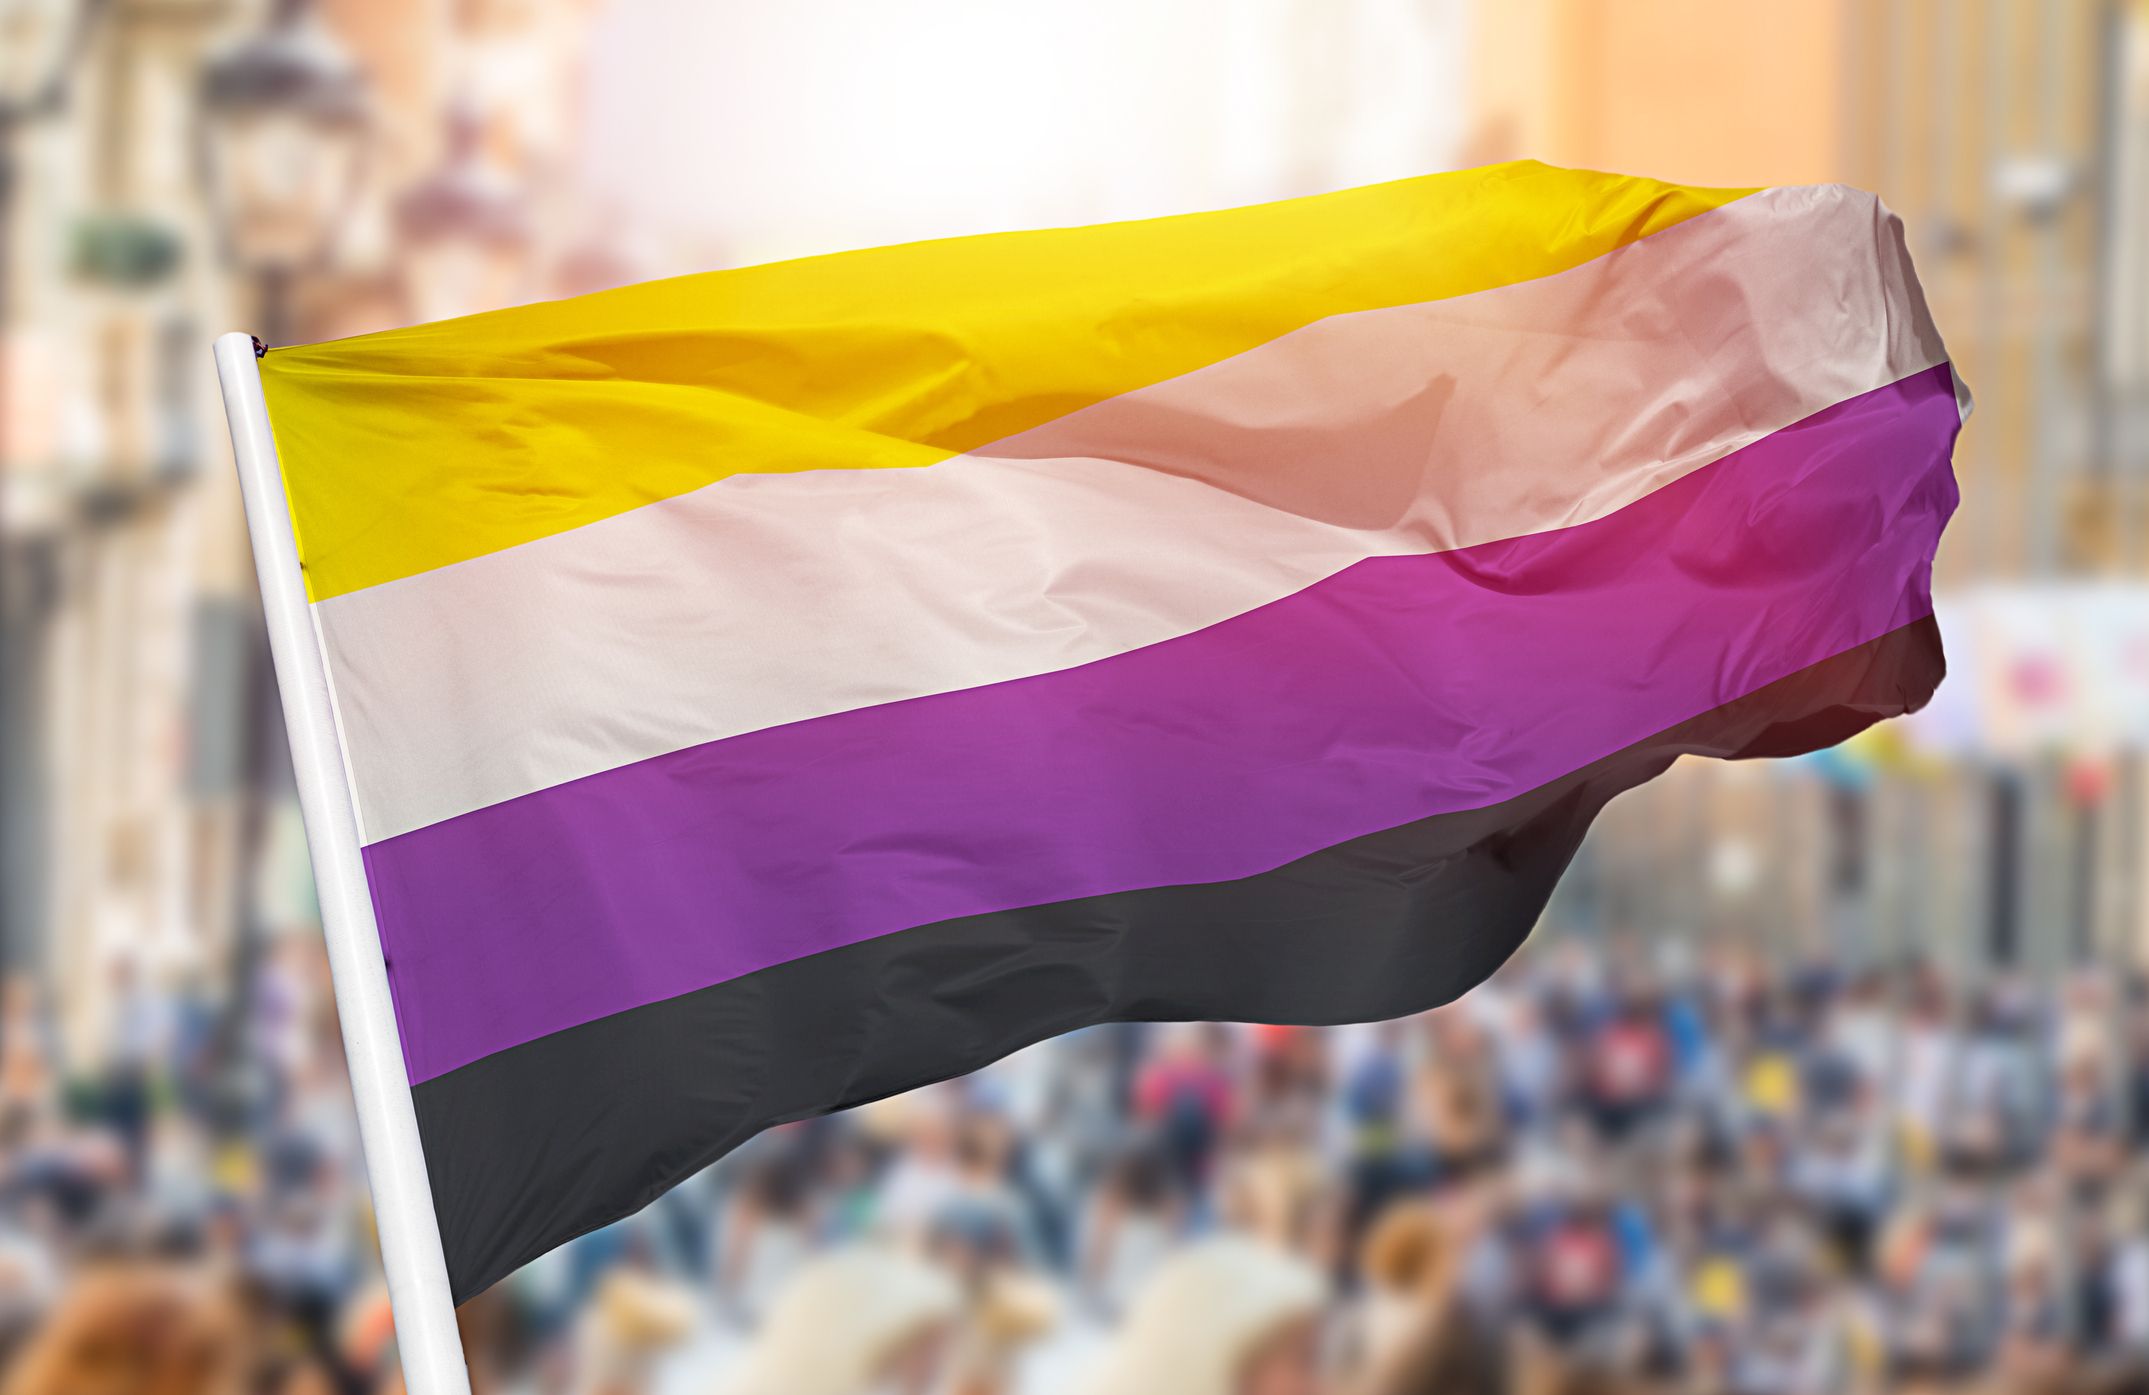 non-binary-pride-flag-blowing-royalty-free-image-1660847409